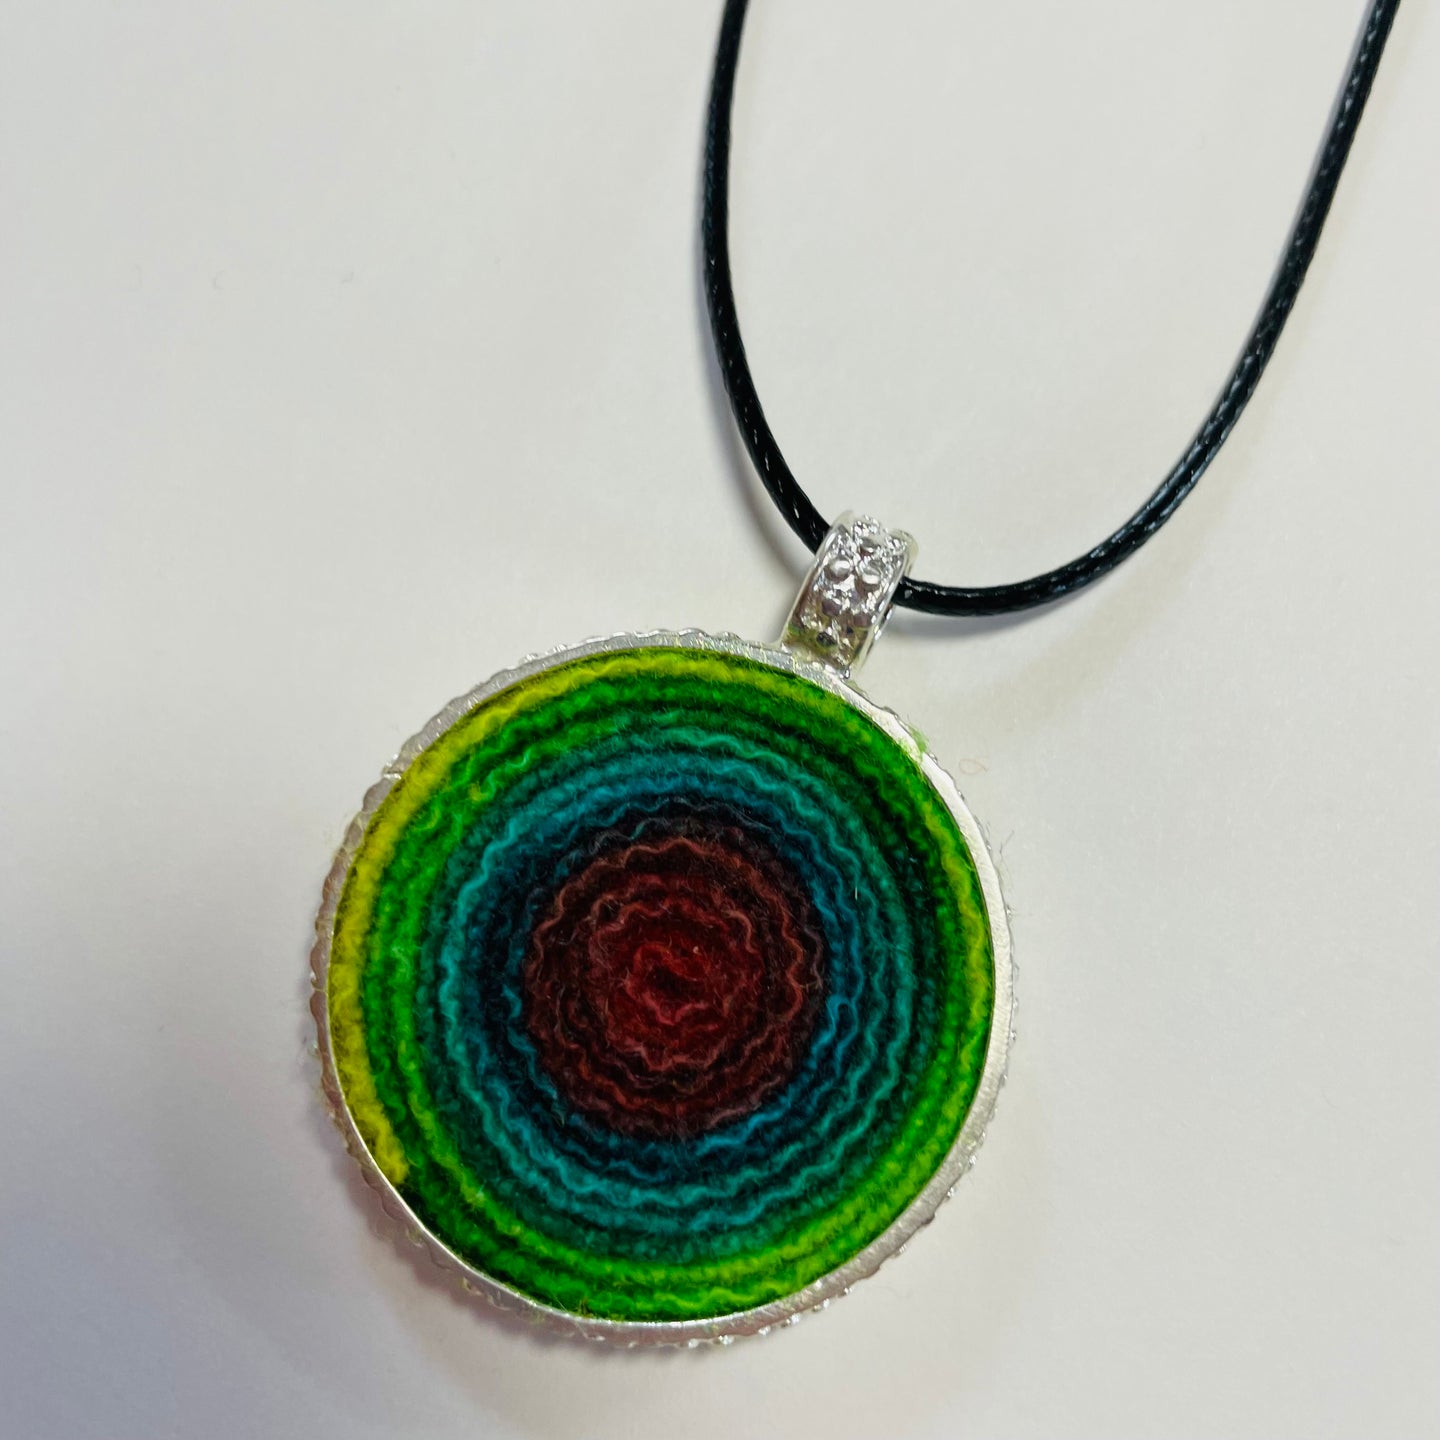 Silver and Wool Pendant / Green and Red Circle